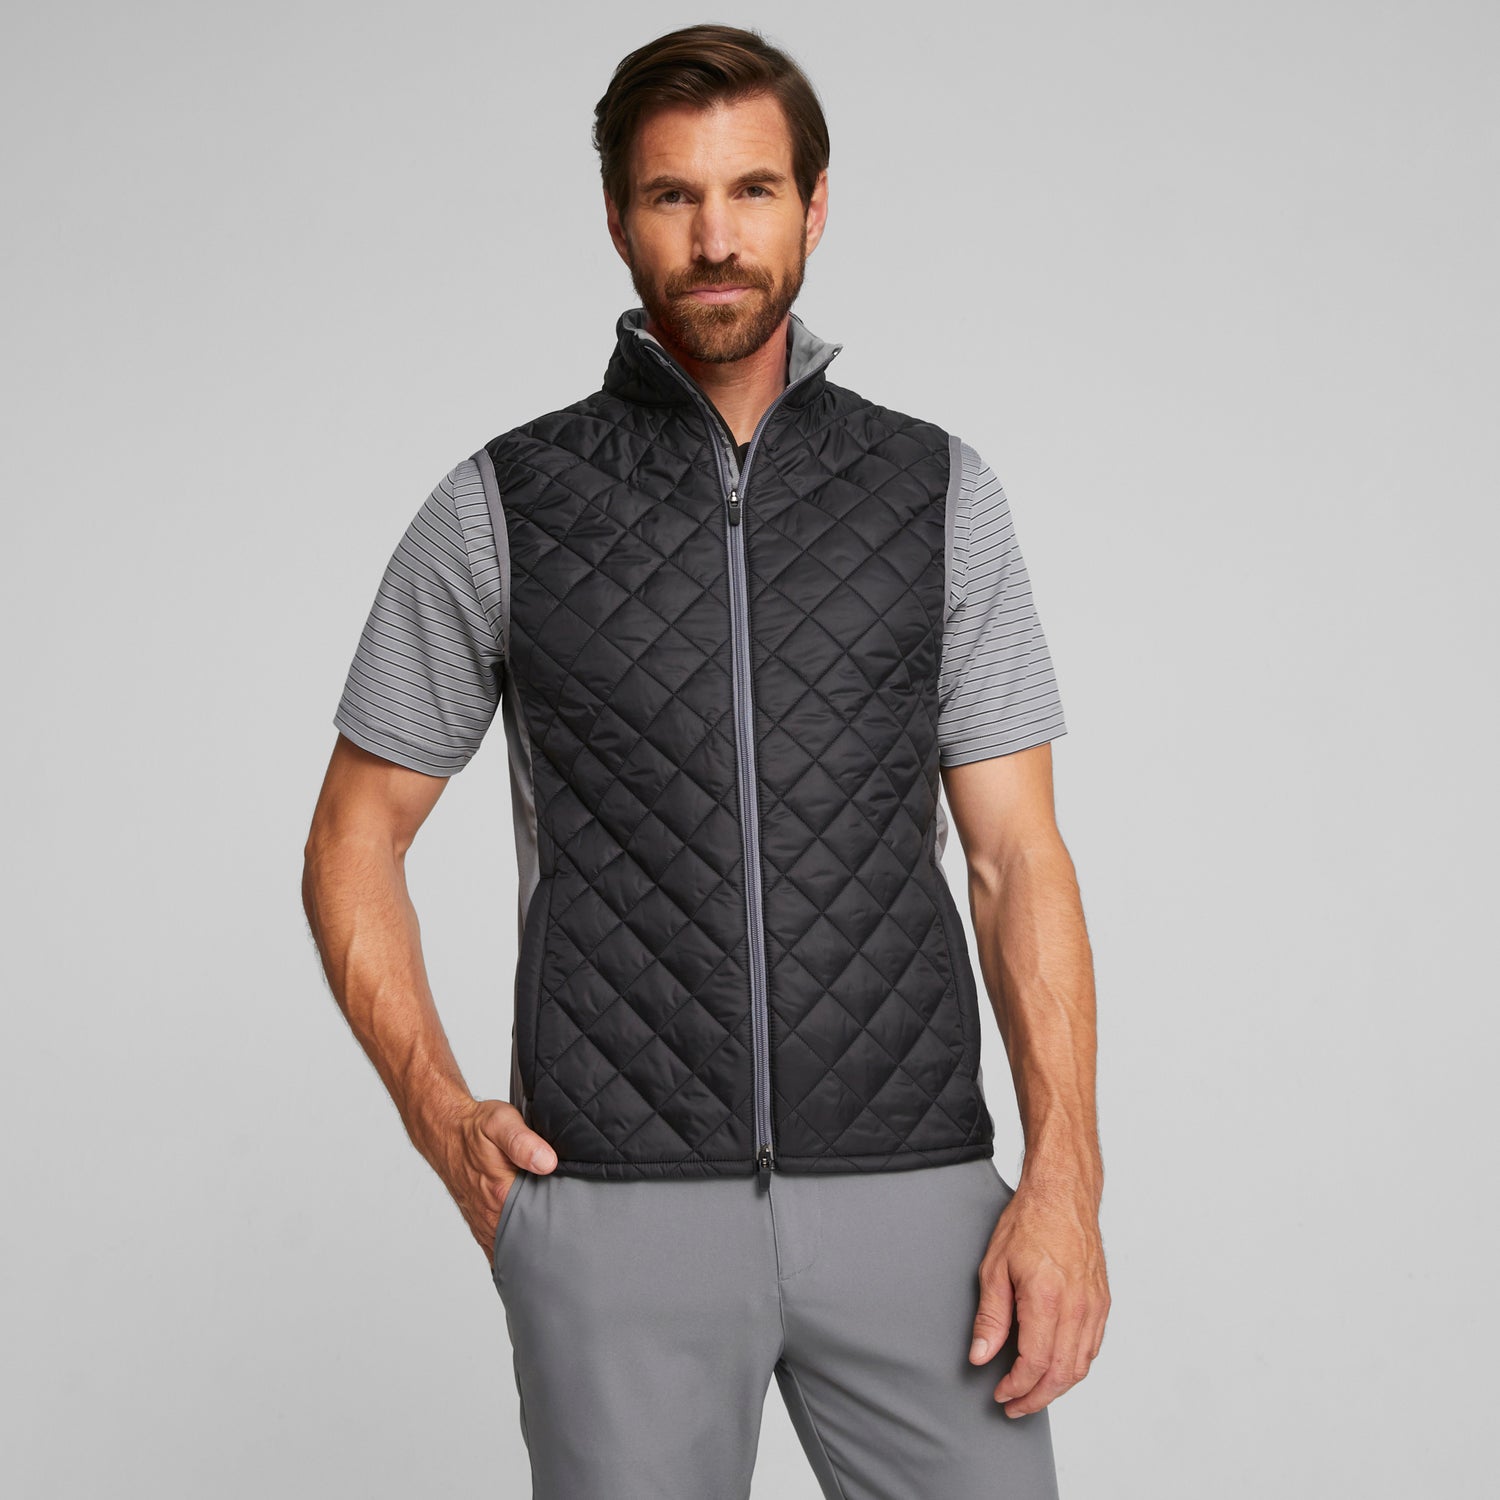 – PUMA Frost Vest Golf Quilted Golf